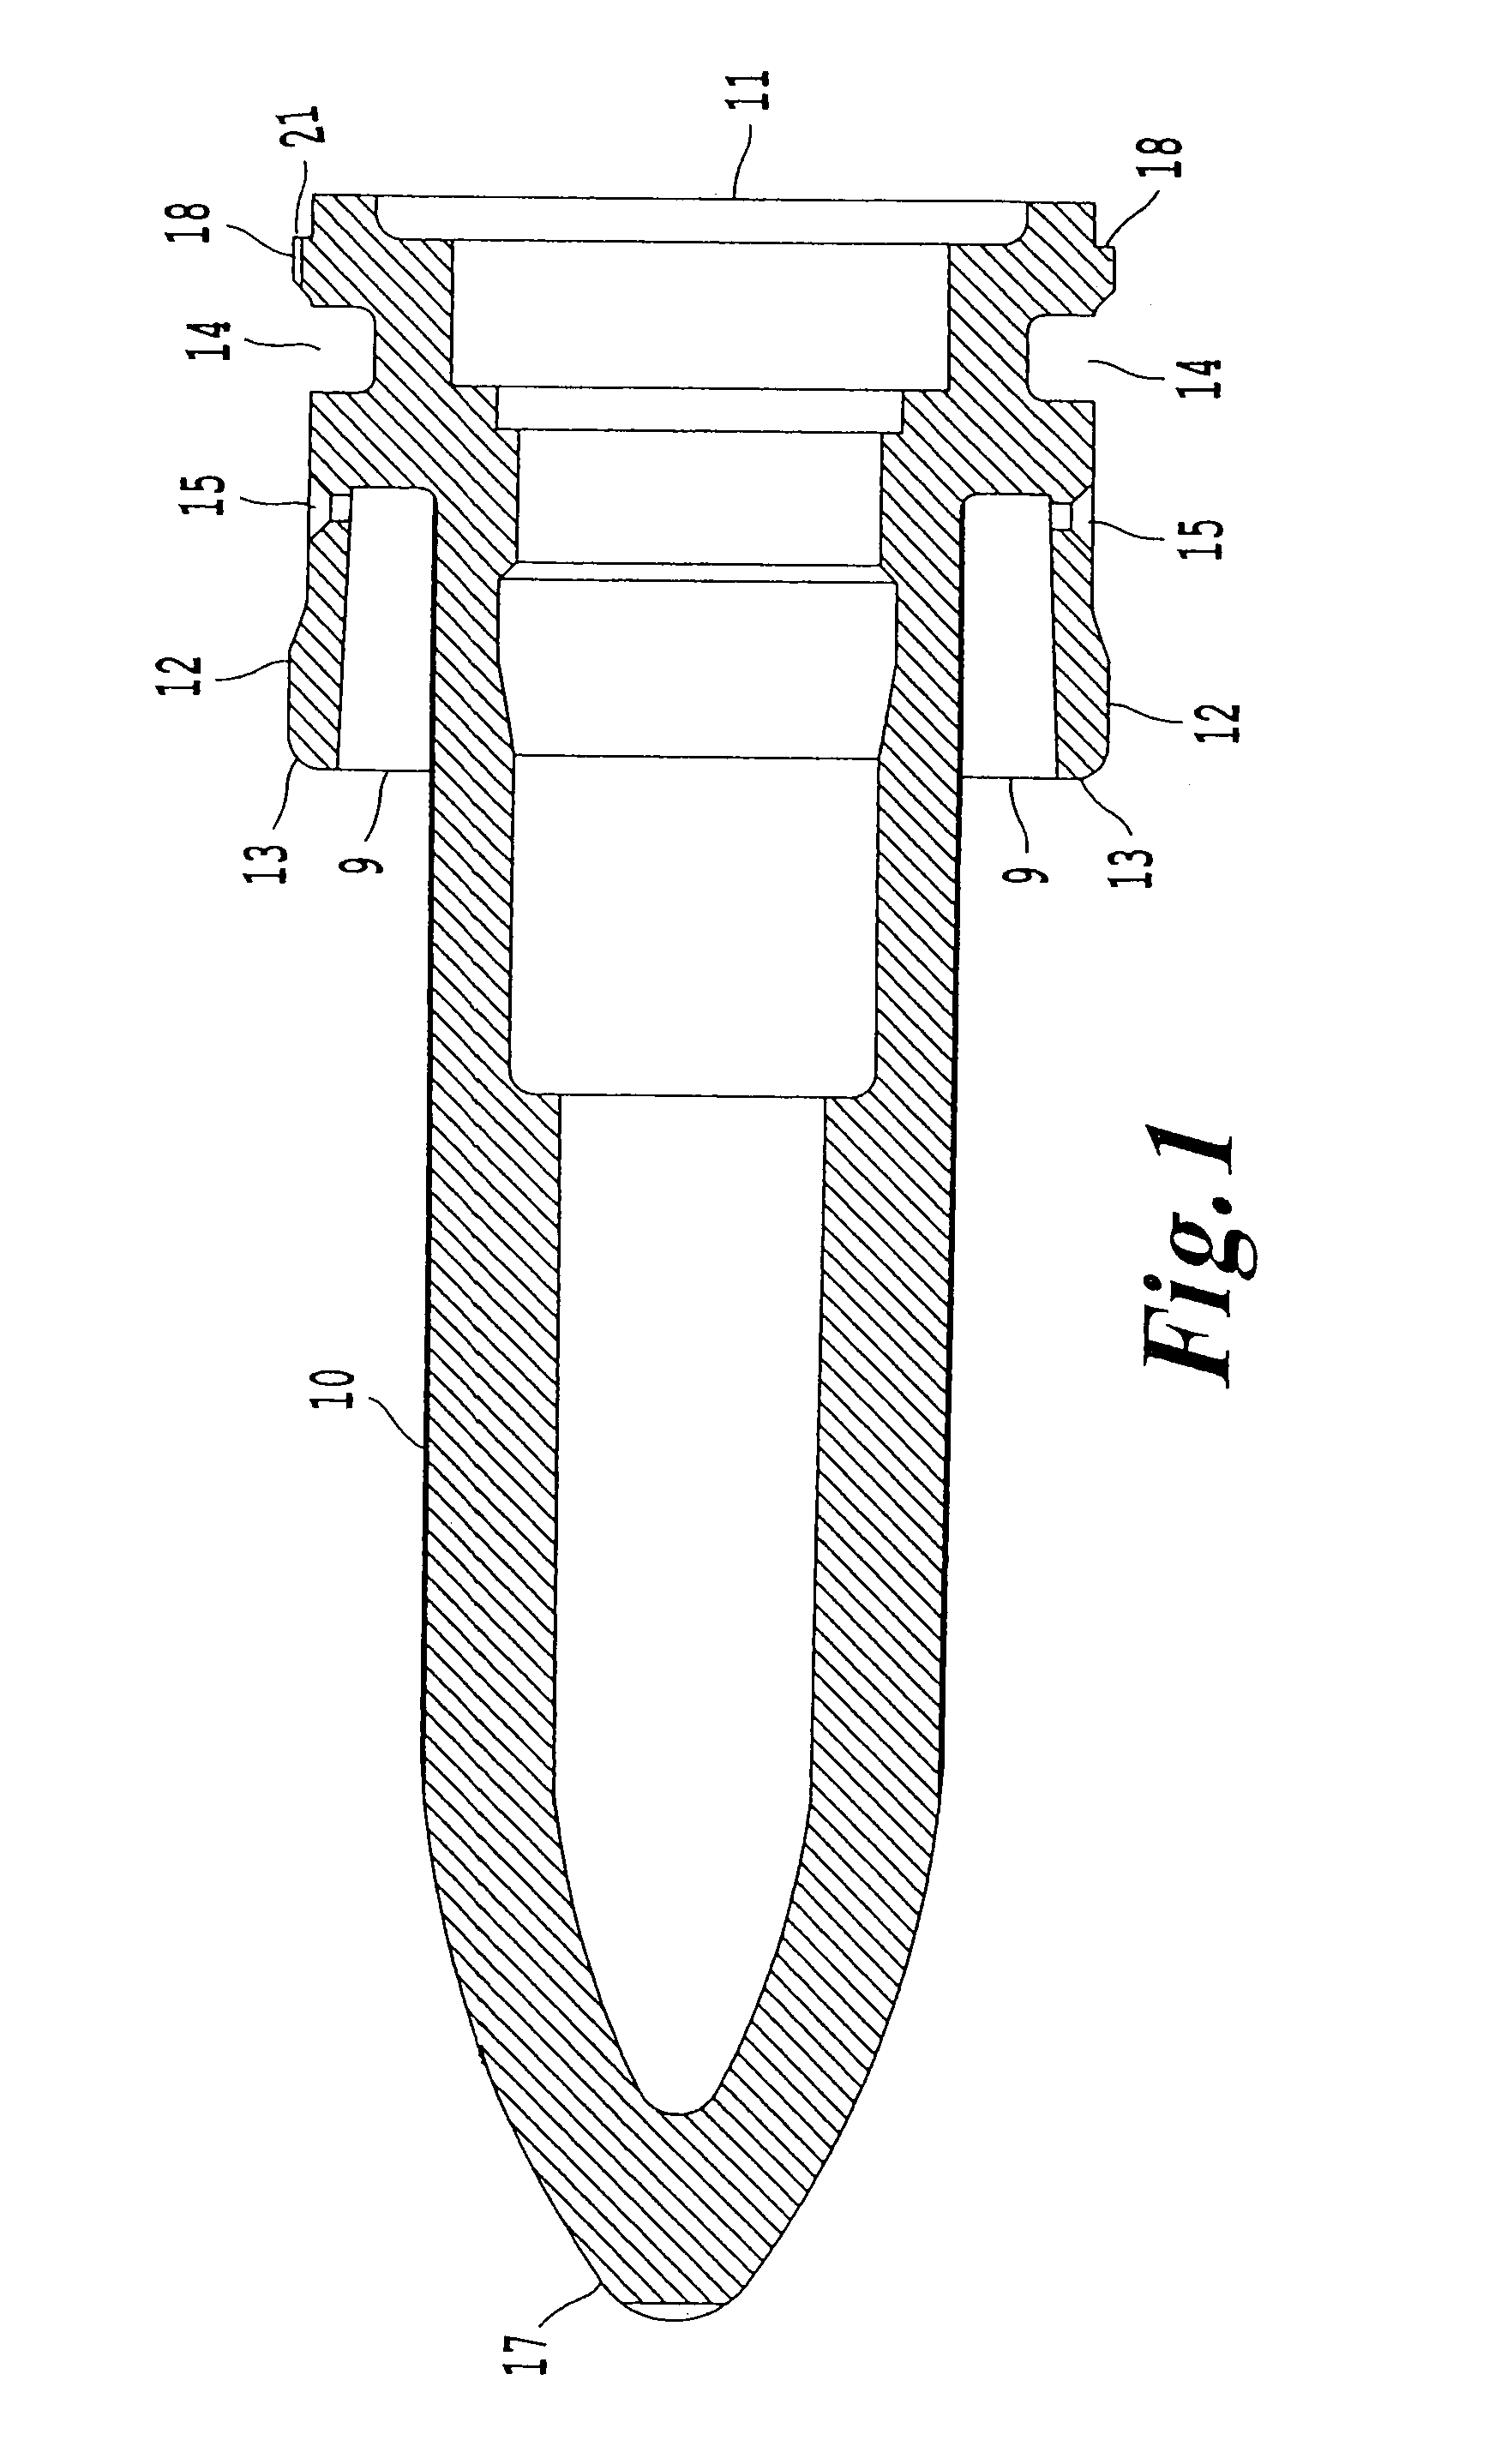 Venting system for a product dispensing device